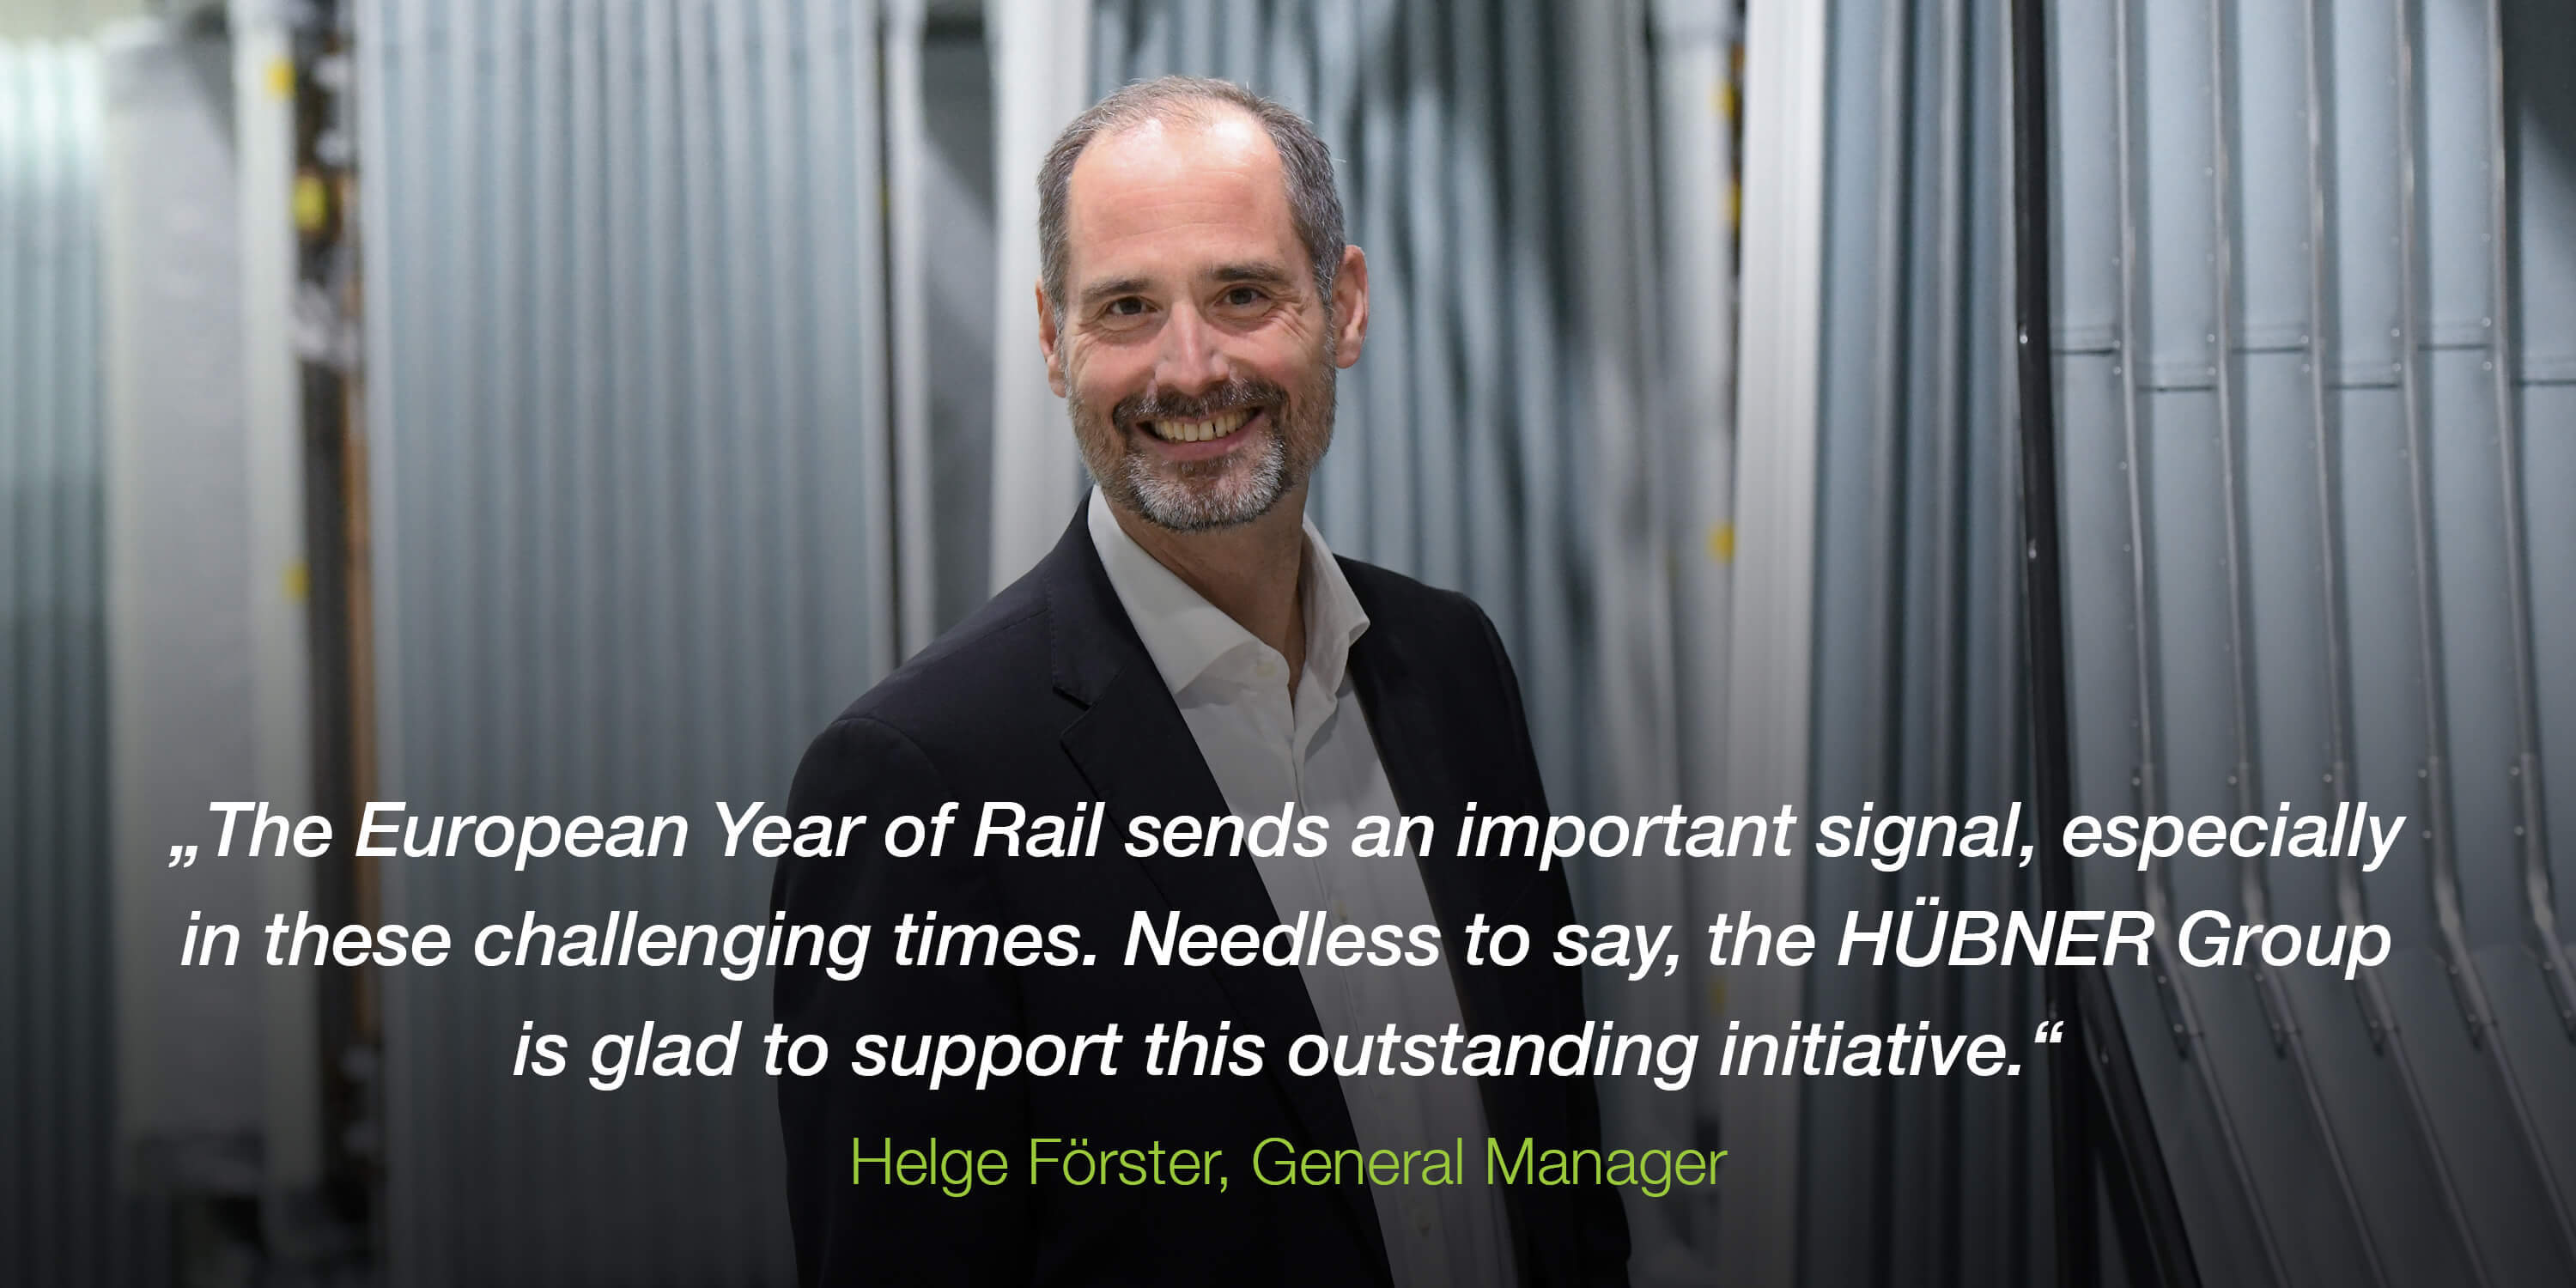 „The European Year of Rail sends an important signal, especially in these challenging times. Needless to say, the HÜBNER Group is glad to support this outstanding initiative.” Helge Förster, General Manager